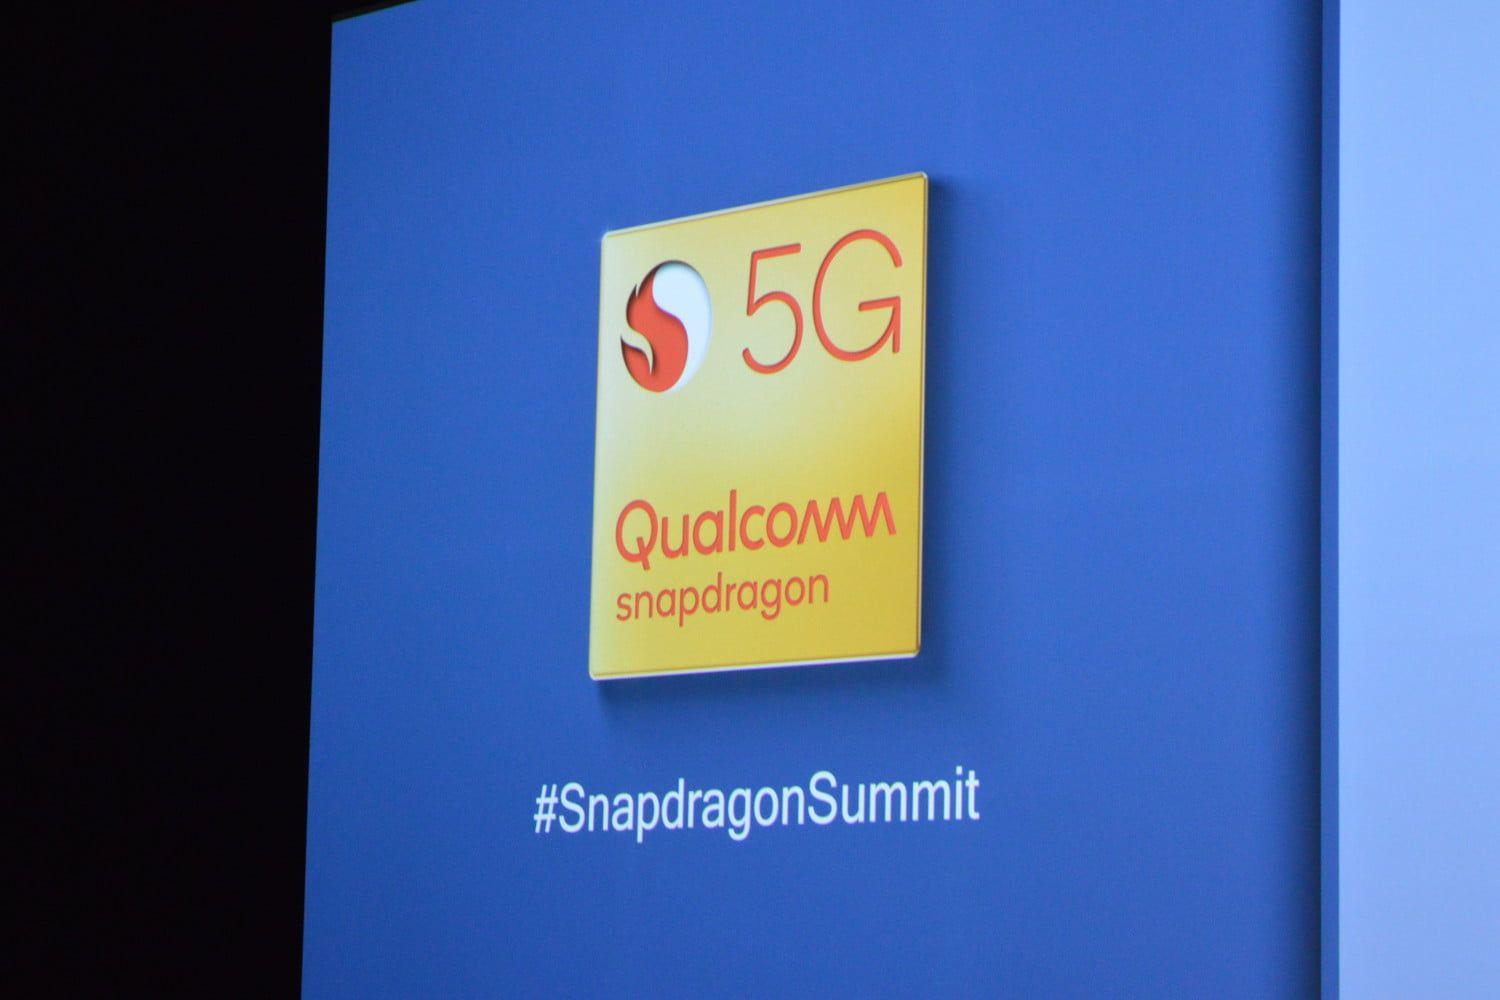 5G Qualcomm Logo - Qualcomm Shares More Details About Its Plan to Bring 5G to